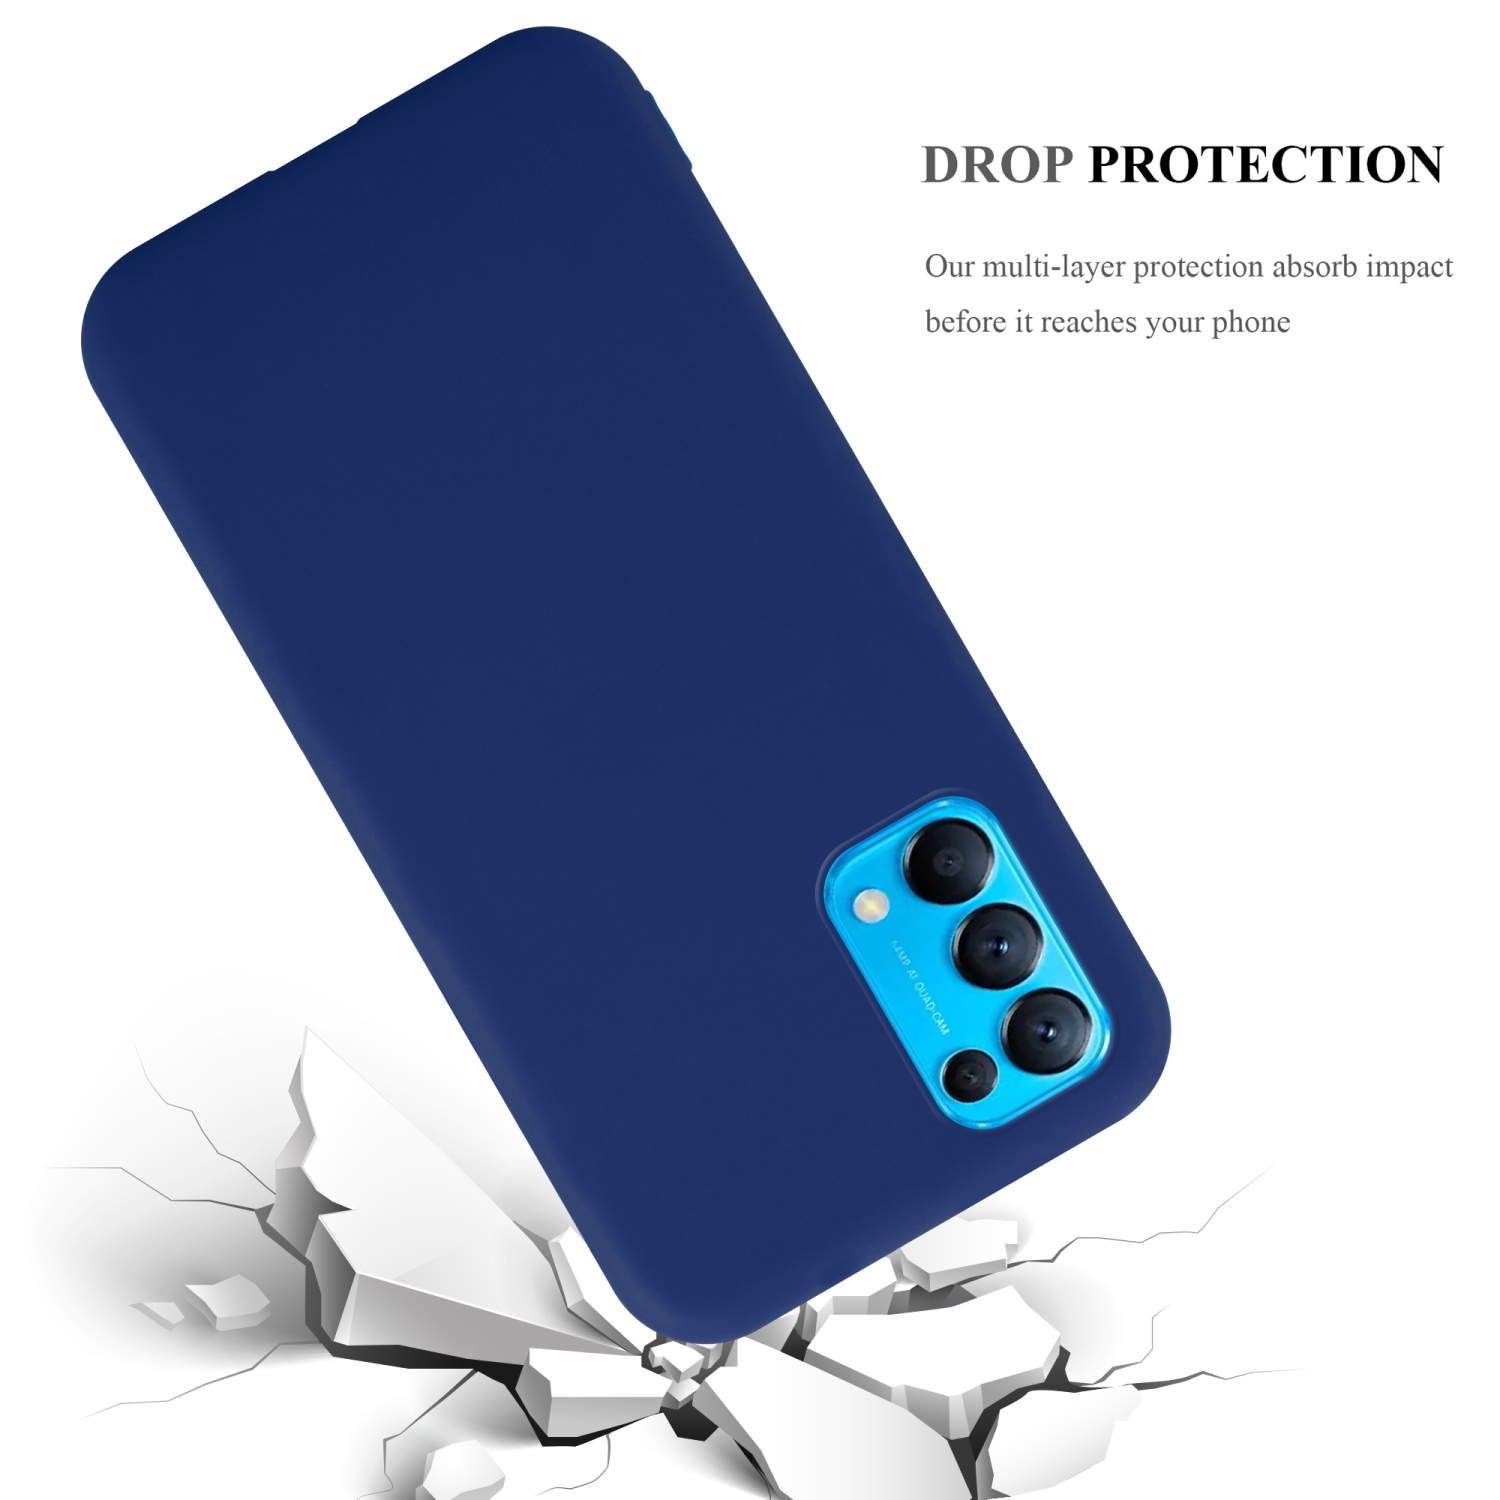 CADORABO Hülle im TPU Candy BLAU LITE, FIND Oppo, Backcover, DUNKEL CANDY Style, X3